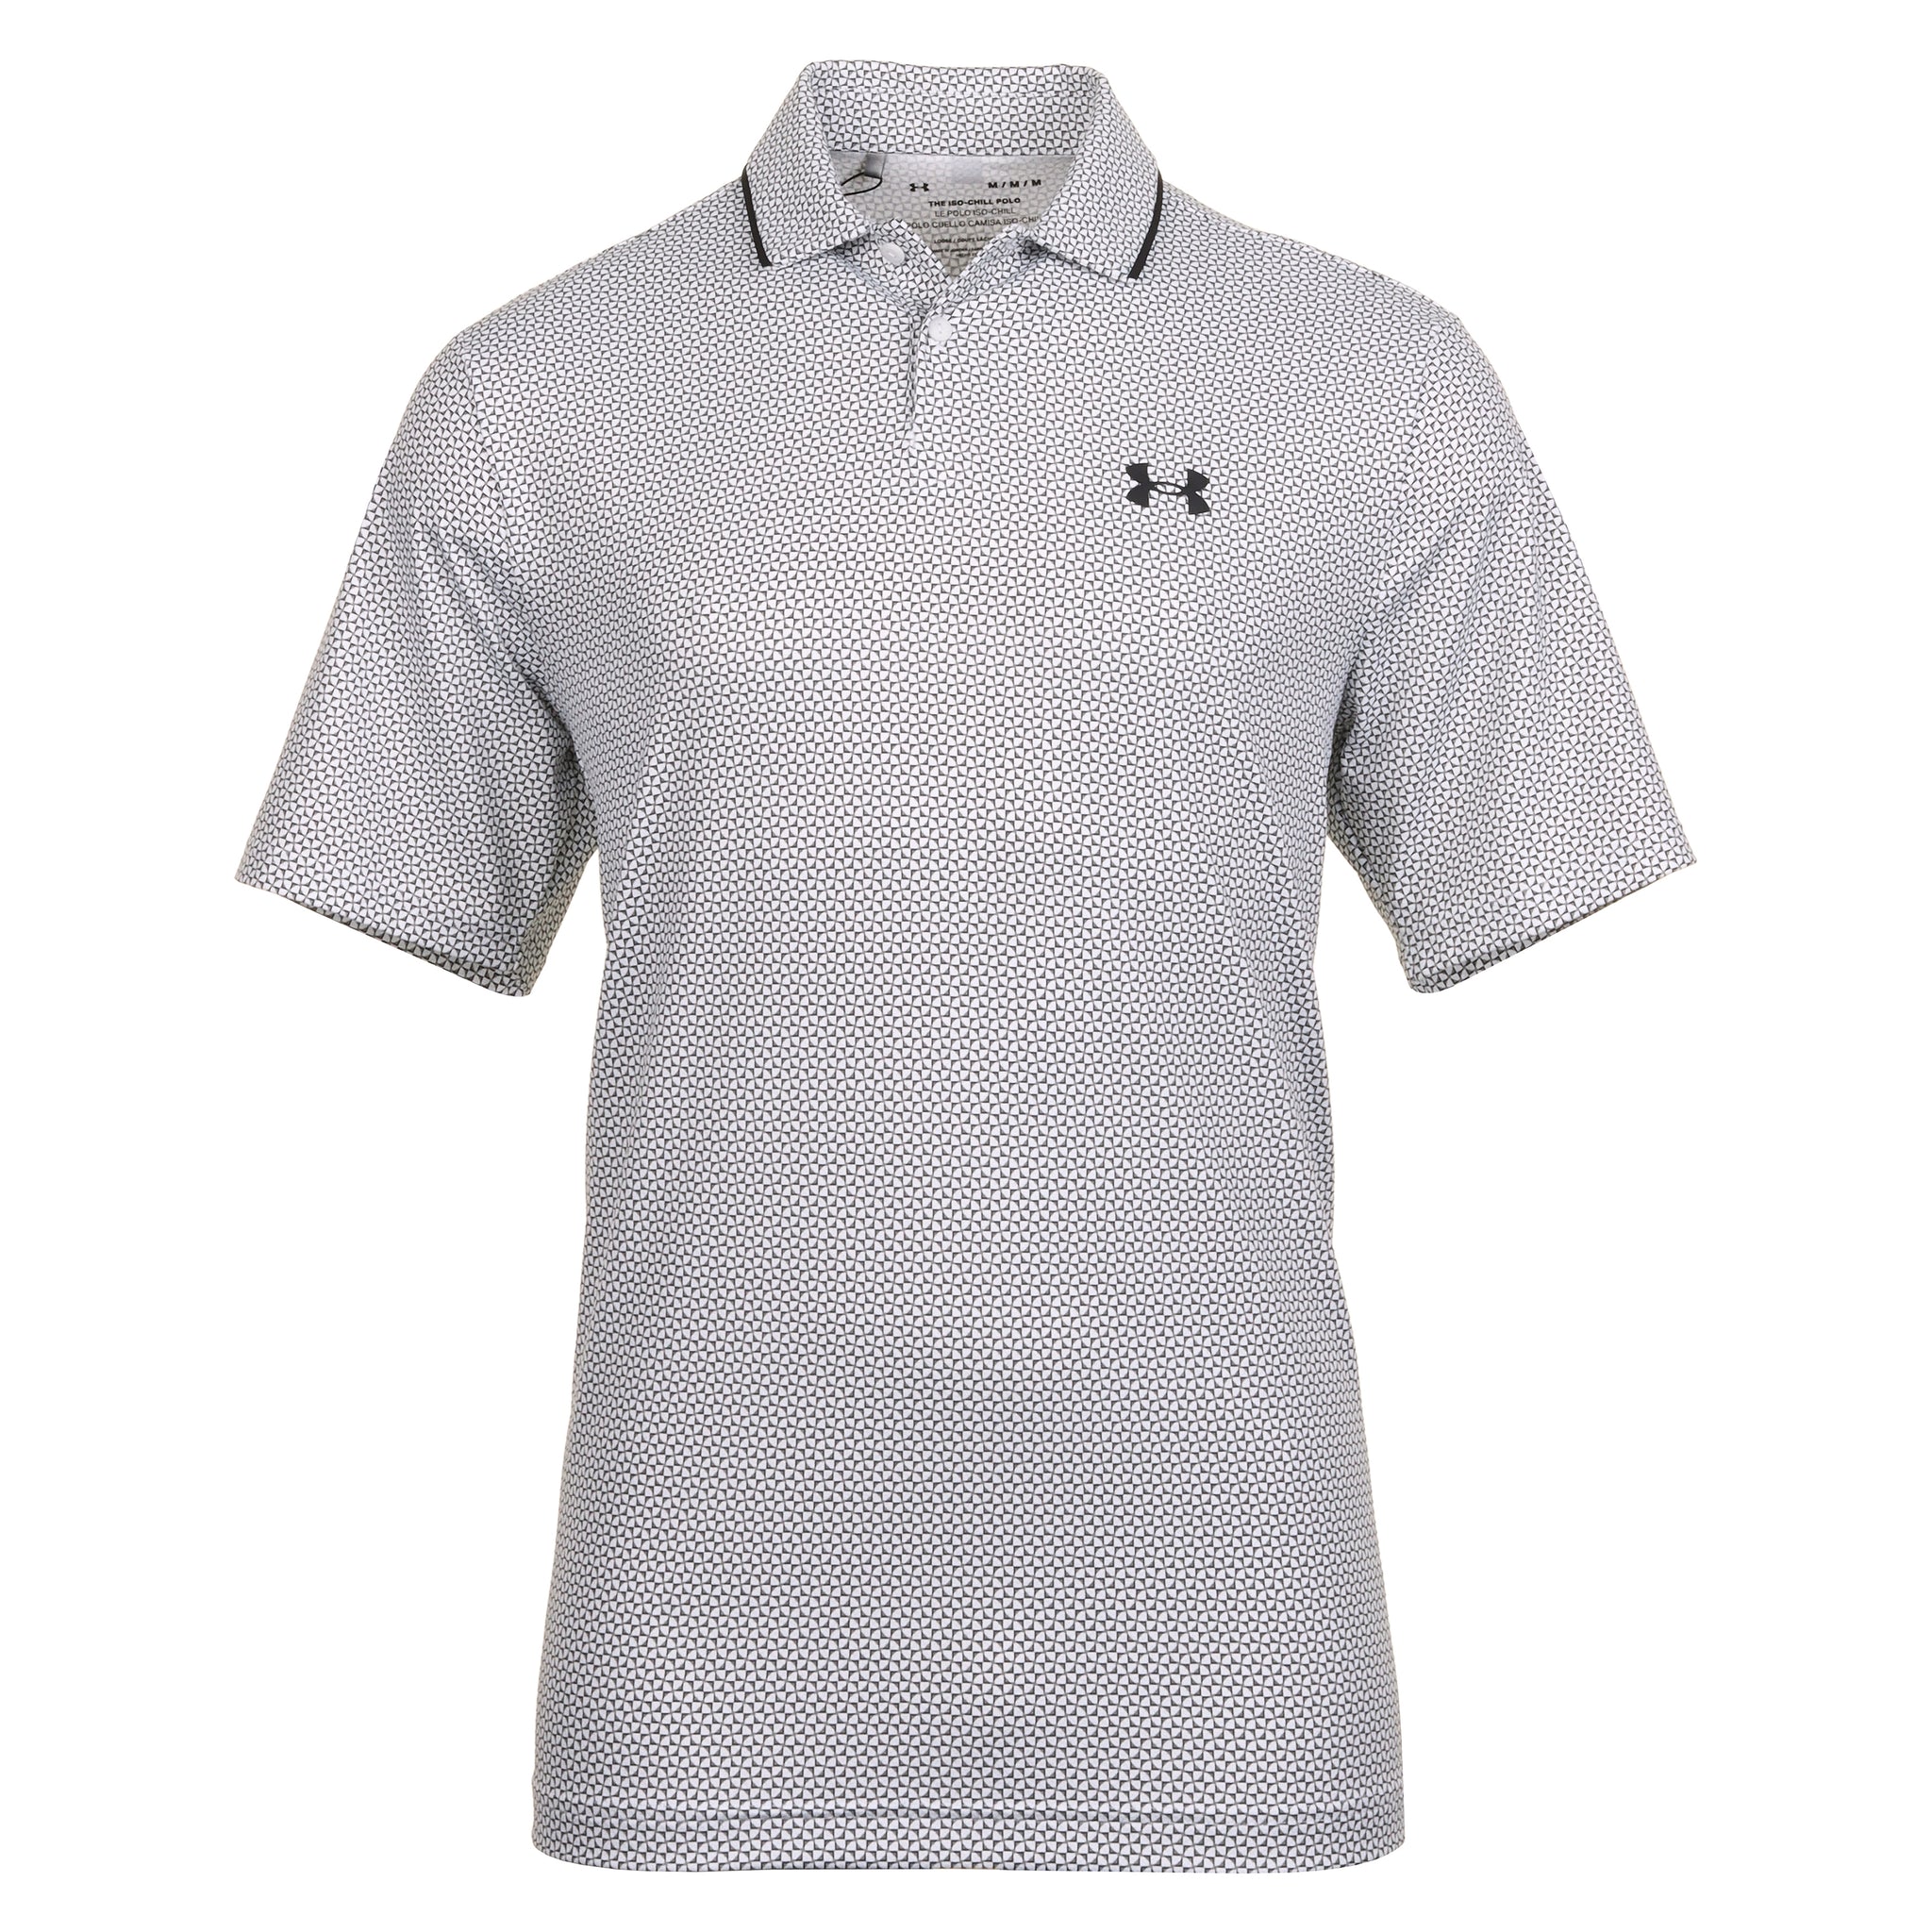 Under Armour Golf Iso-Chill Verge Shirt 1377366 White Halo Grey Black 102